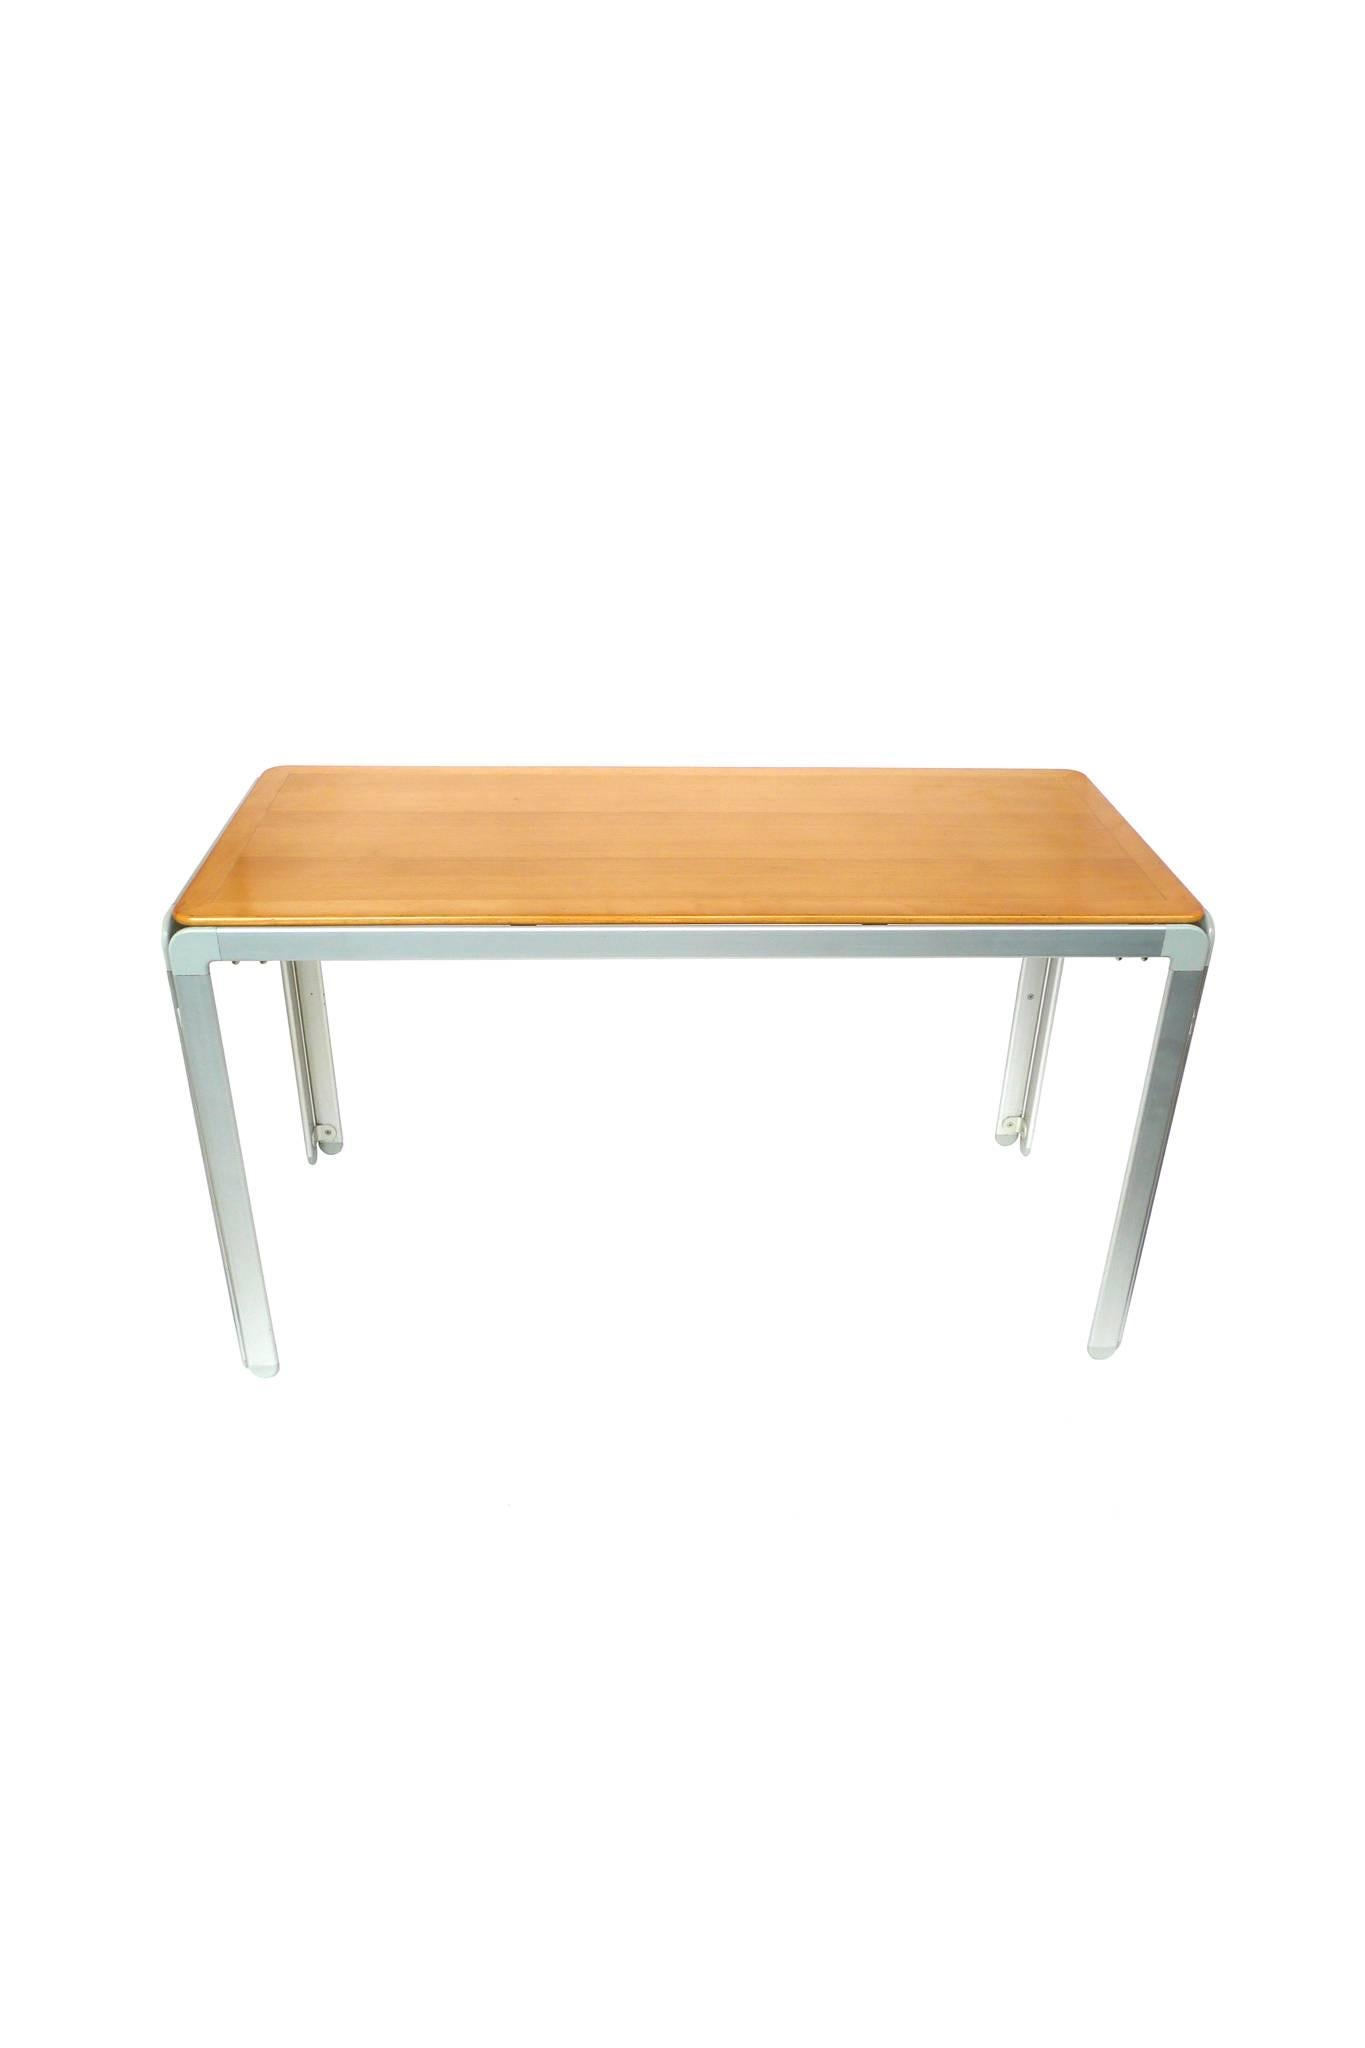 This table is designed by Danish architect Arne Jacobsen, renowned for his simple, light modern designs. The tabletop is beech wood with smooth bevelled edges, while the legs and frame are aluminium with rounded curves. This table is low with ample